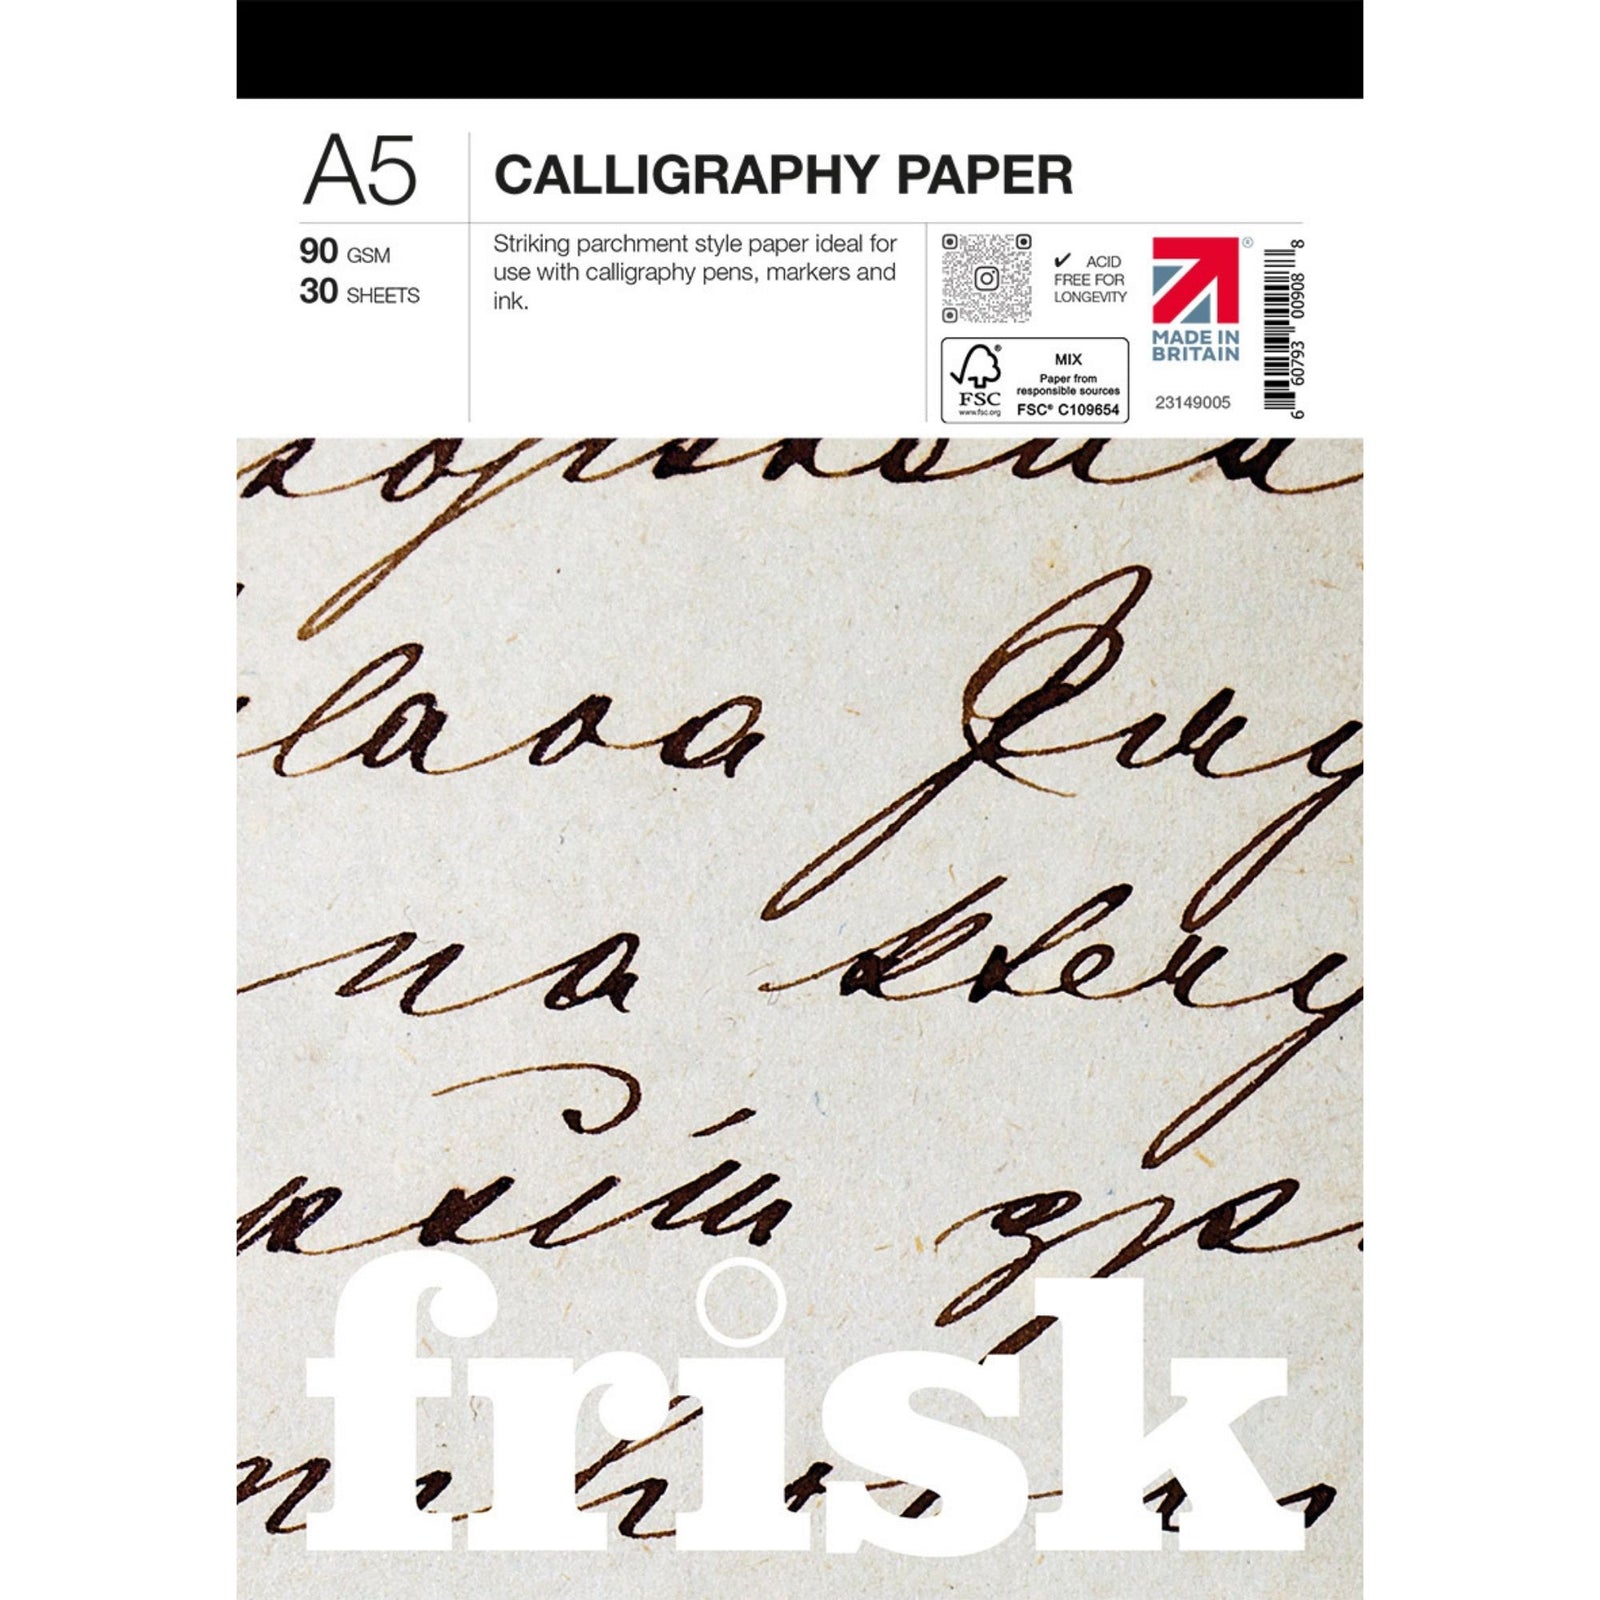 Calligraphy Writing Pad Fancy: Grid Paper for Calligraphy, Arabic Calligraphy  Paper, Calligraphy Paper and Envelopes (Paperback)